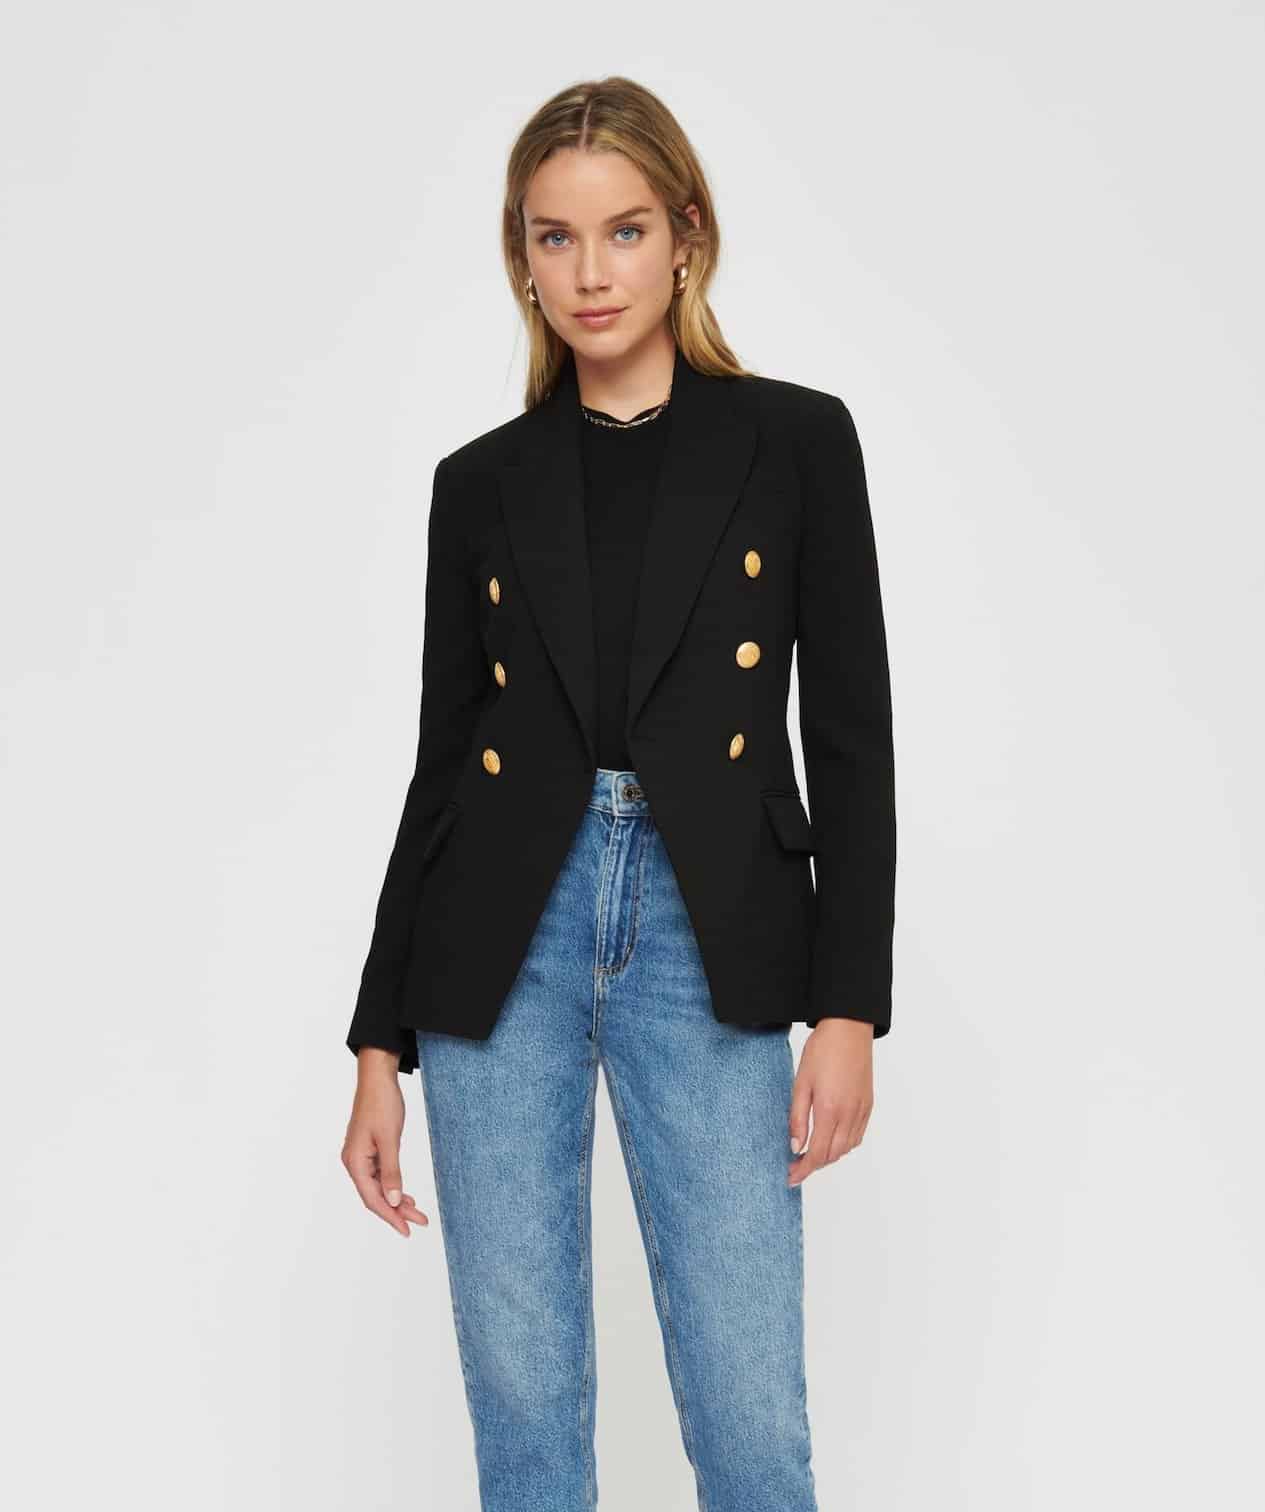 image of a woman wearing a black blazer with gold buttons and blue jeans